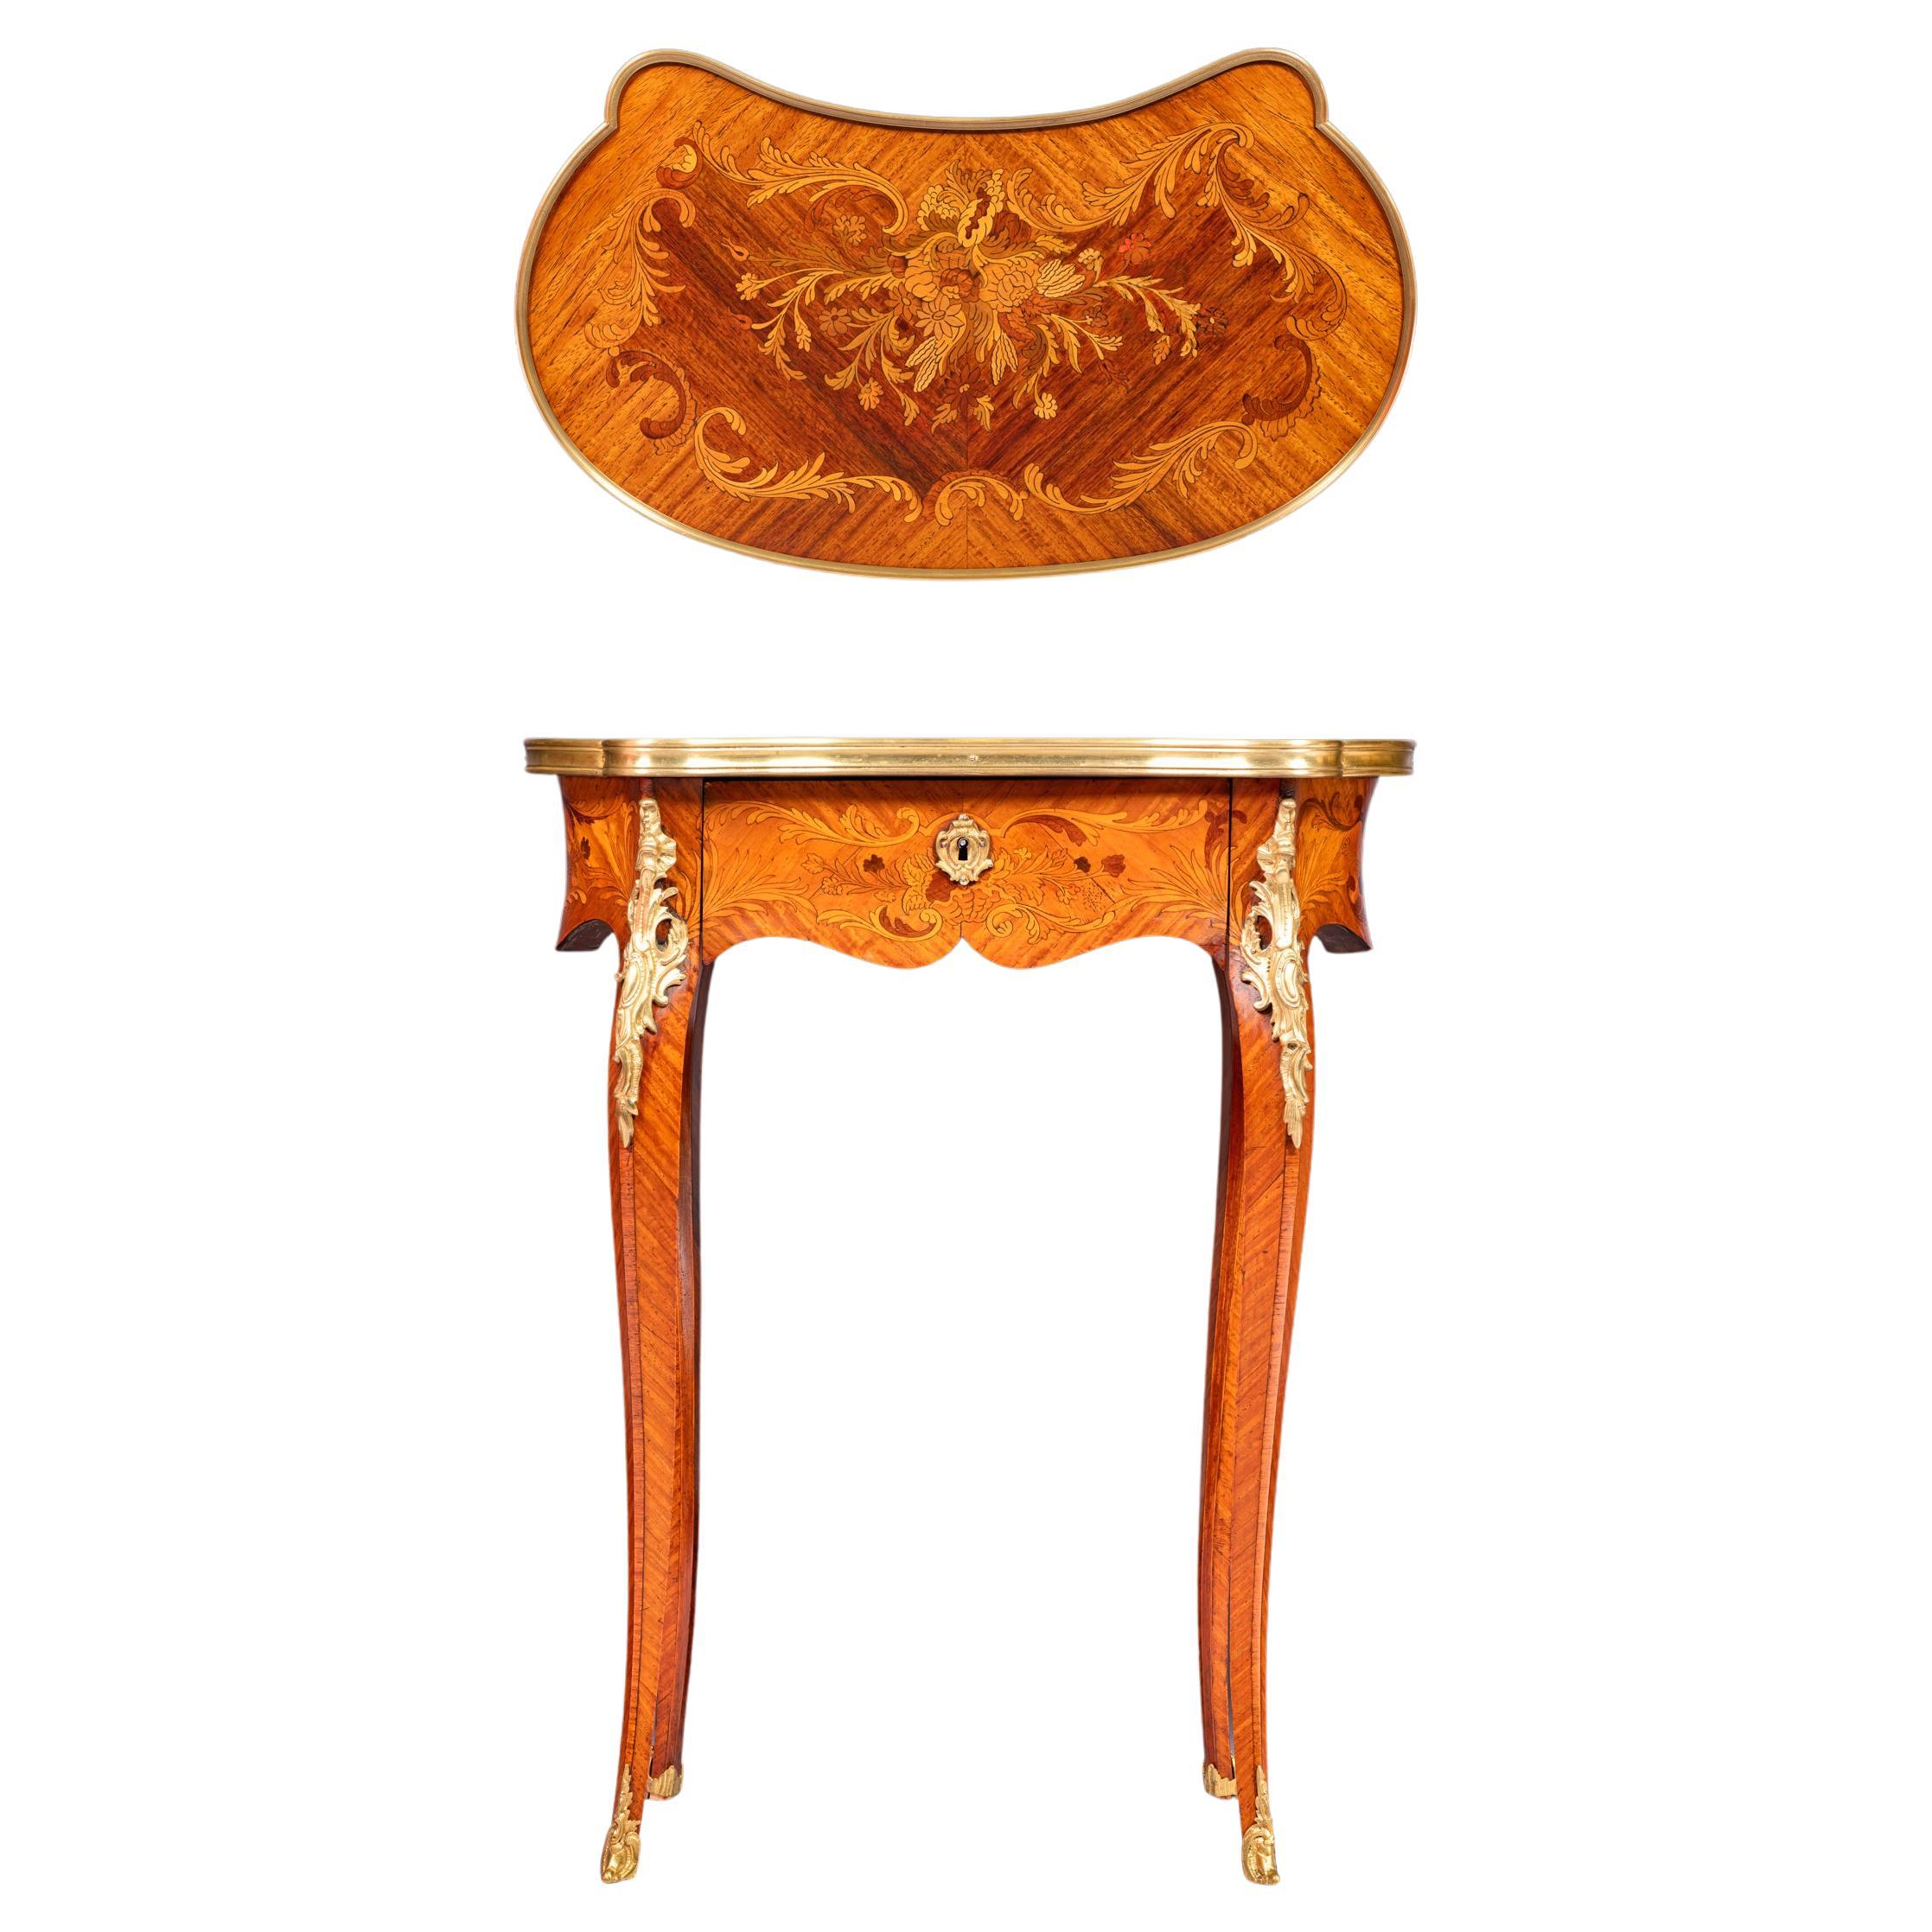 19th Century French Kingwood & Marquetry Side Table /  "Table à Rognon":